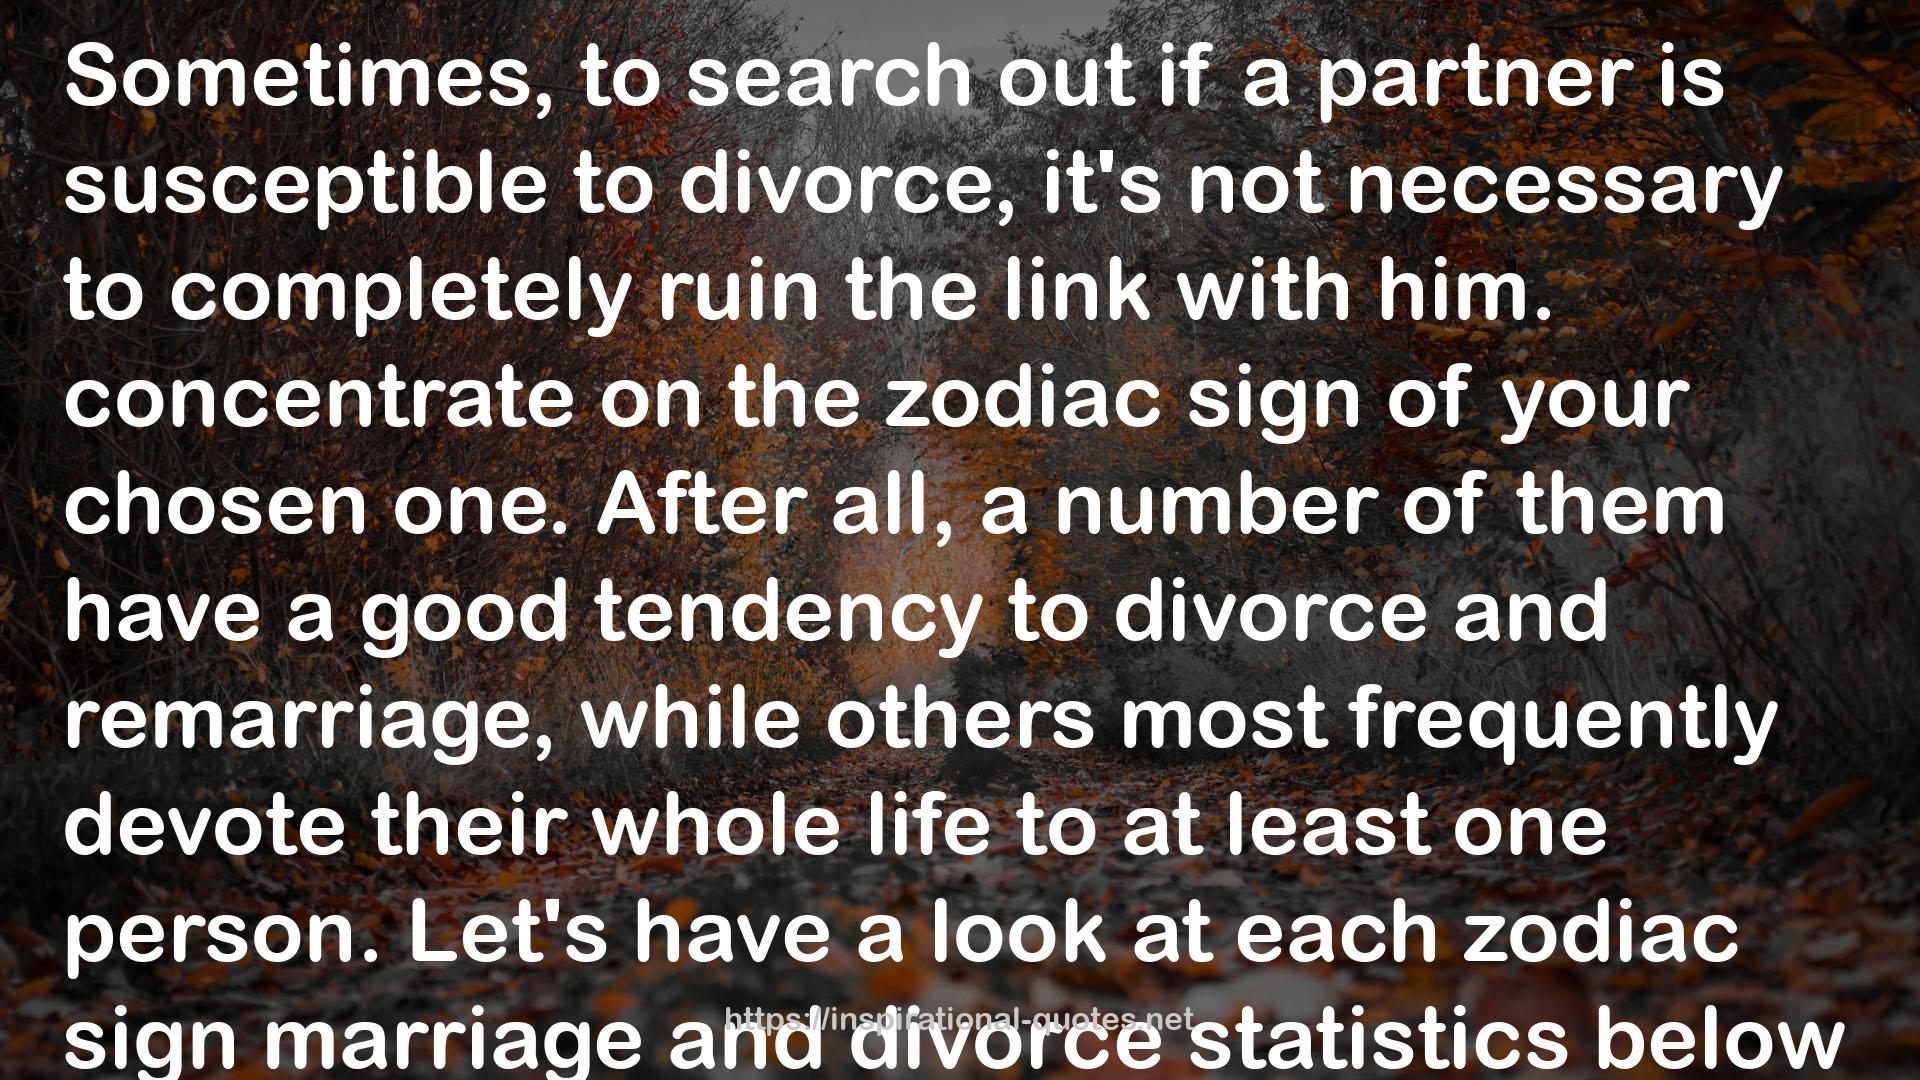 Zodiac Signs Marriage and Divorce Statisticshttps://gopoco.us/Zodiac_Signs_Marriage_and_Divorce_Stat QUOTES